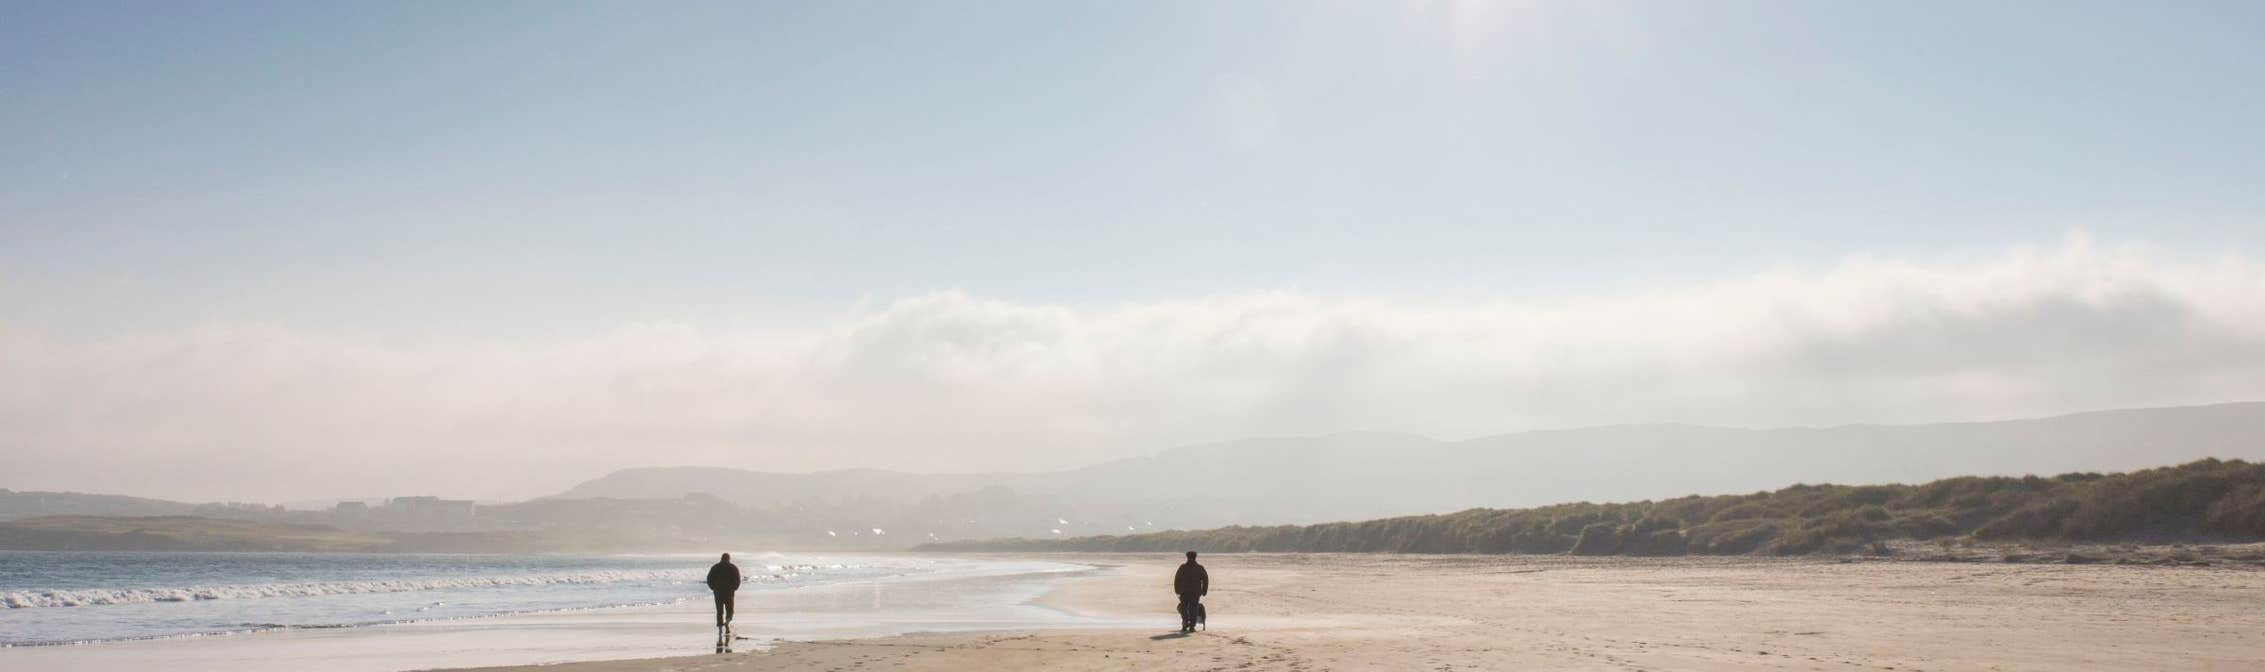 Image of walkers on the beach in Dunfanaghy in County Donegal